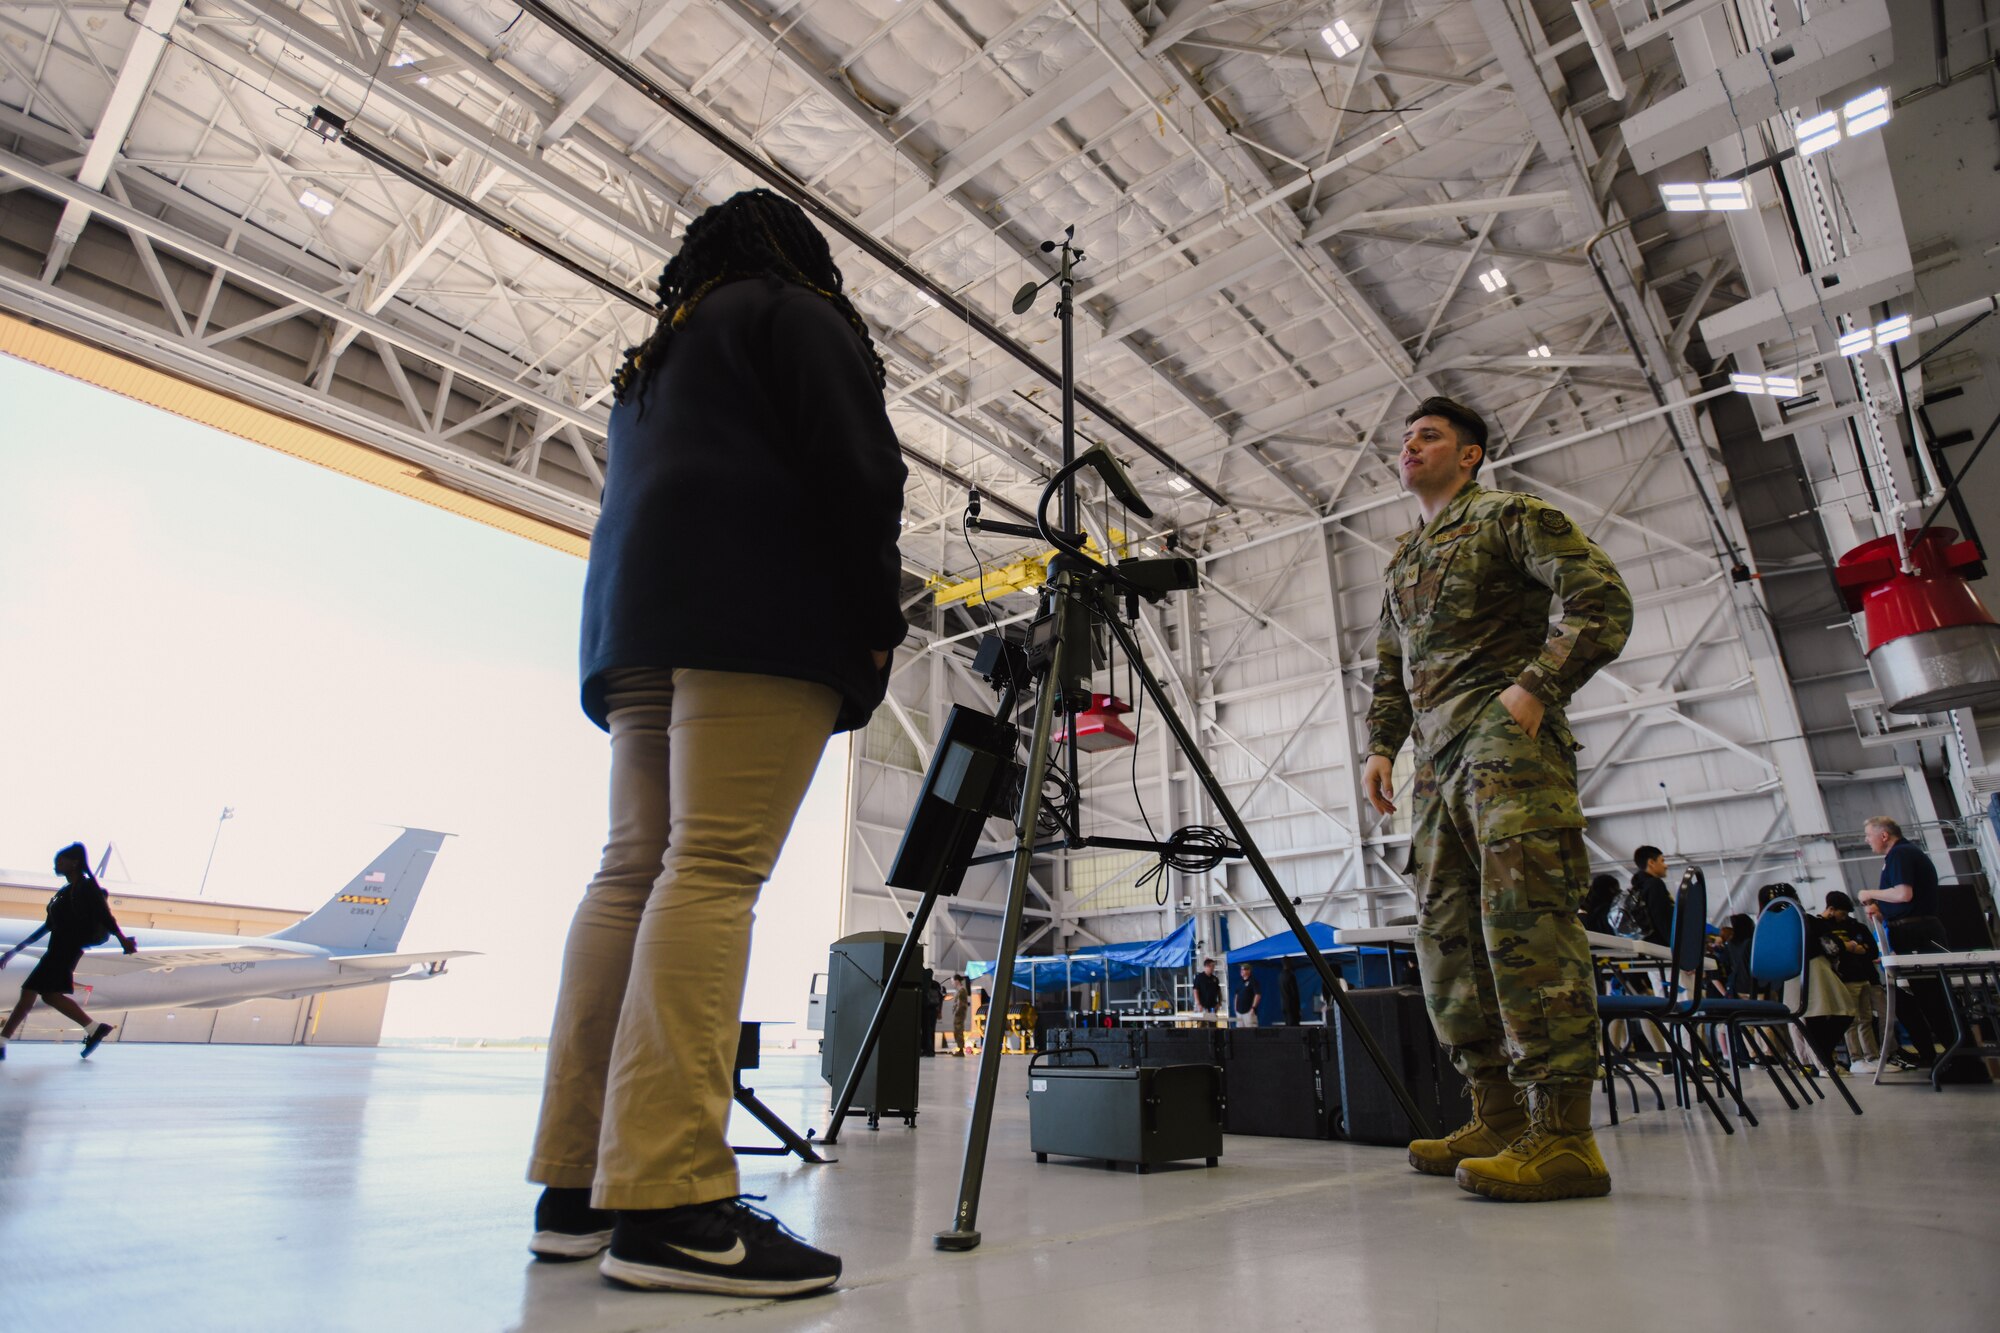 An 89th Operations Support Squadron member teaches a student about a TMQ-53 Tactical Meteorological Observing System during the inaugural Science, Technology, Engineering, Arts, and Math Competition and Exhibition at Joint Base Andrews, Md., April 20, 2023.